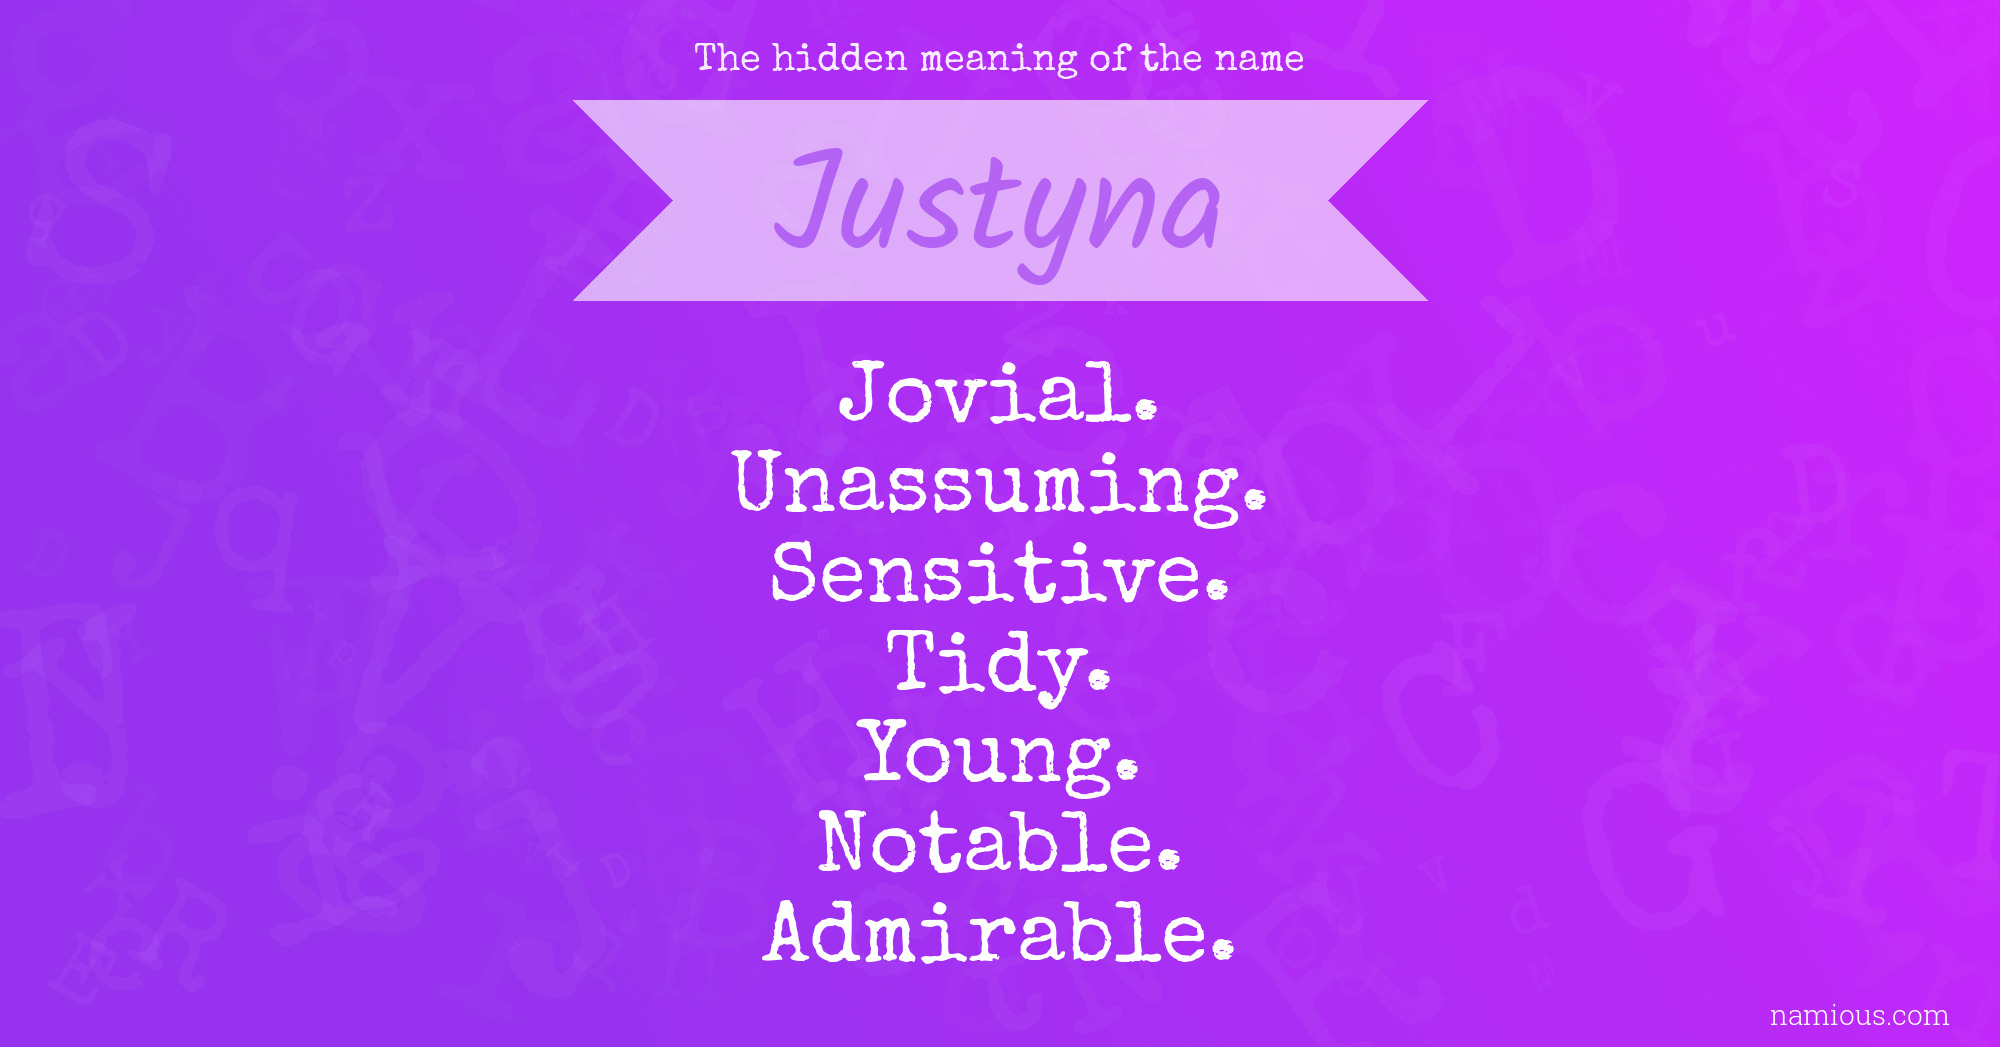 The hidden meaning of the name Justyna